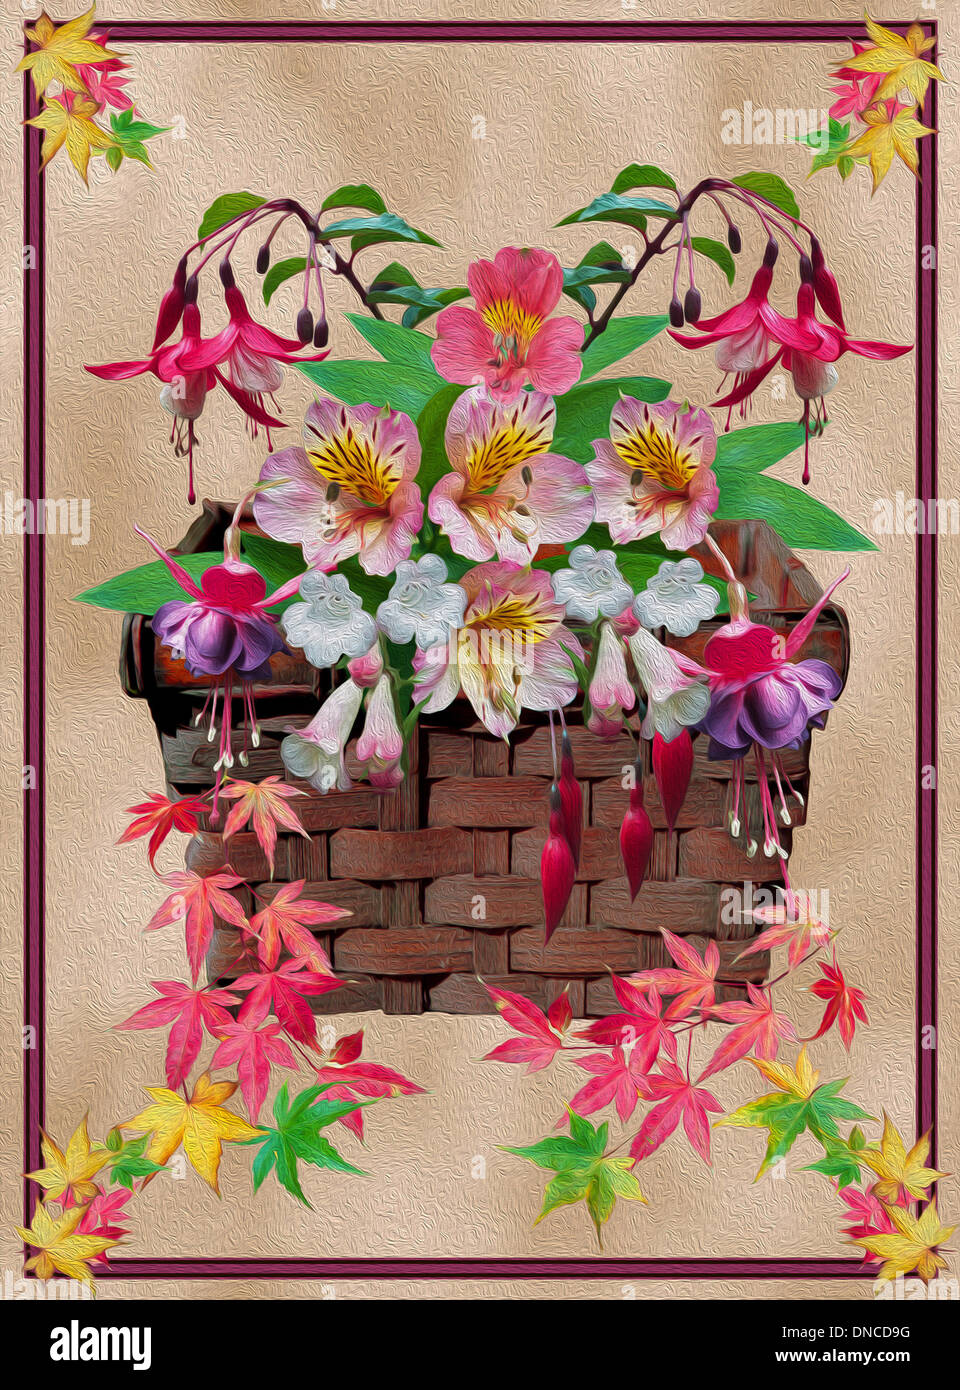 Unique floral art with pink alstroemeria flowers, purple fuchsias, colourful red and gold autumn leaves in brown wicker basket Stock Photo